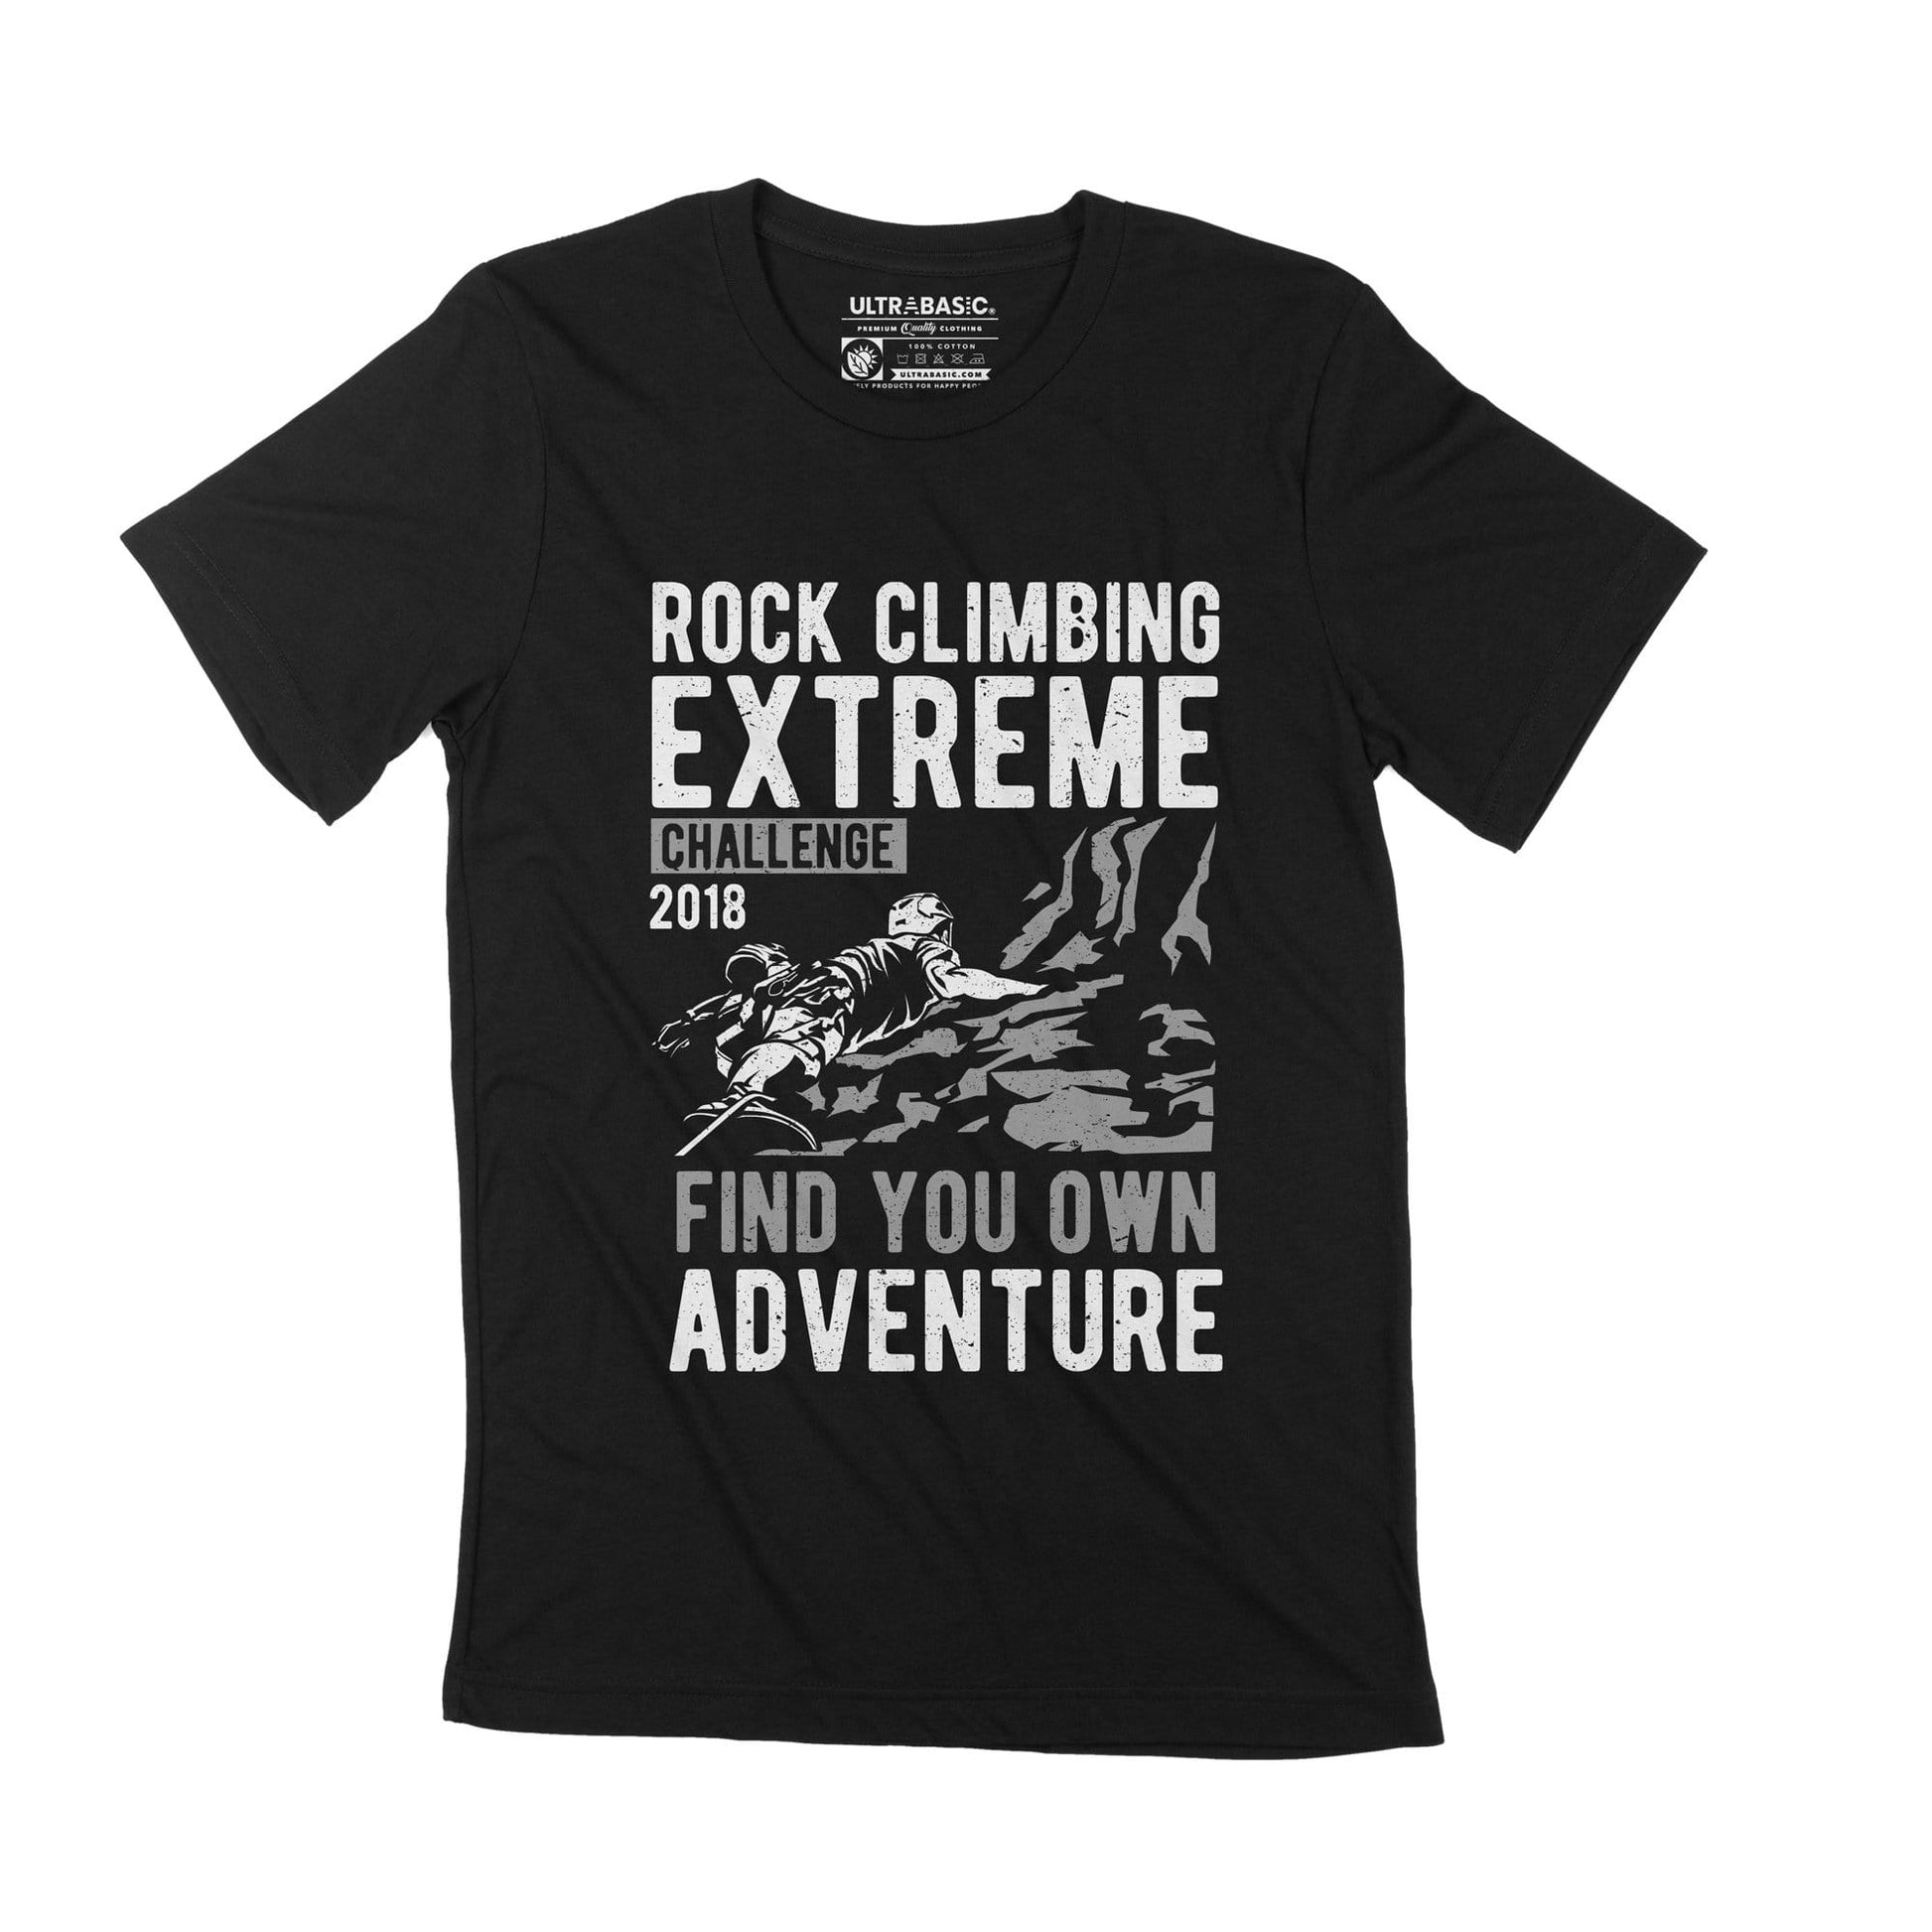 ULTRABASIC Rock Climbing Men's T-Shirt - Mountain Extreme Adventure Graphic Tee expedition everest shirts nepal mountains are calling climber climbers ice pick outdoor apparel outdoorsy camping woman camping tees camp hike adult unisex wilderness sports exercise nature motivation slogan merch fathers day christmas classic